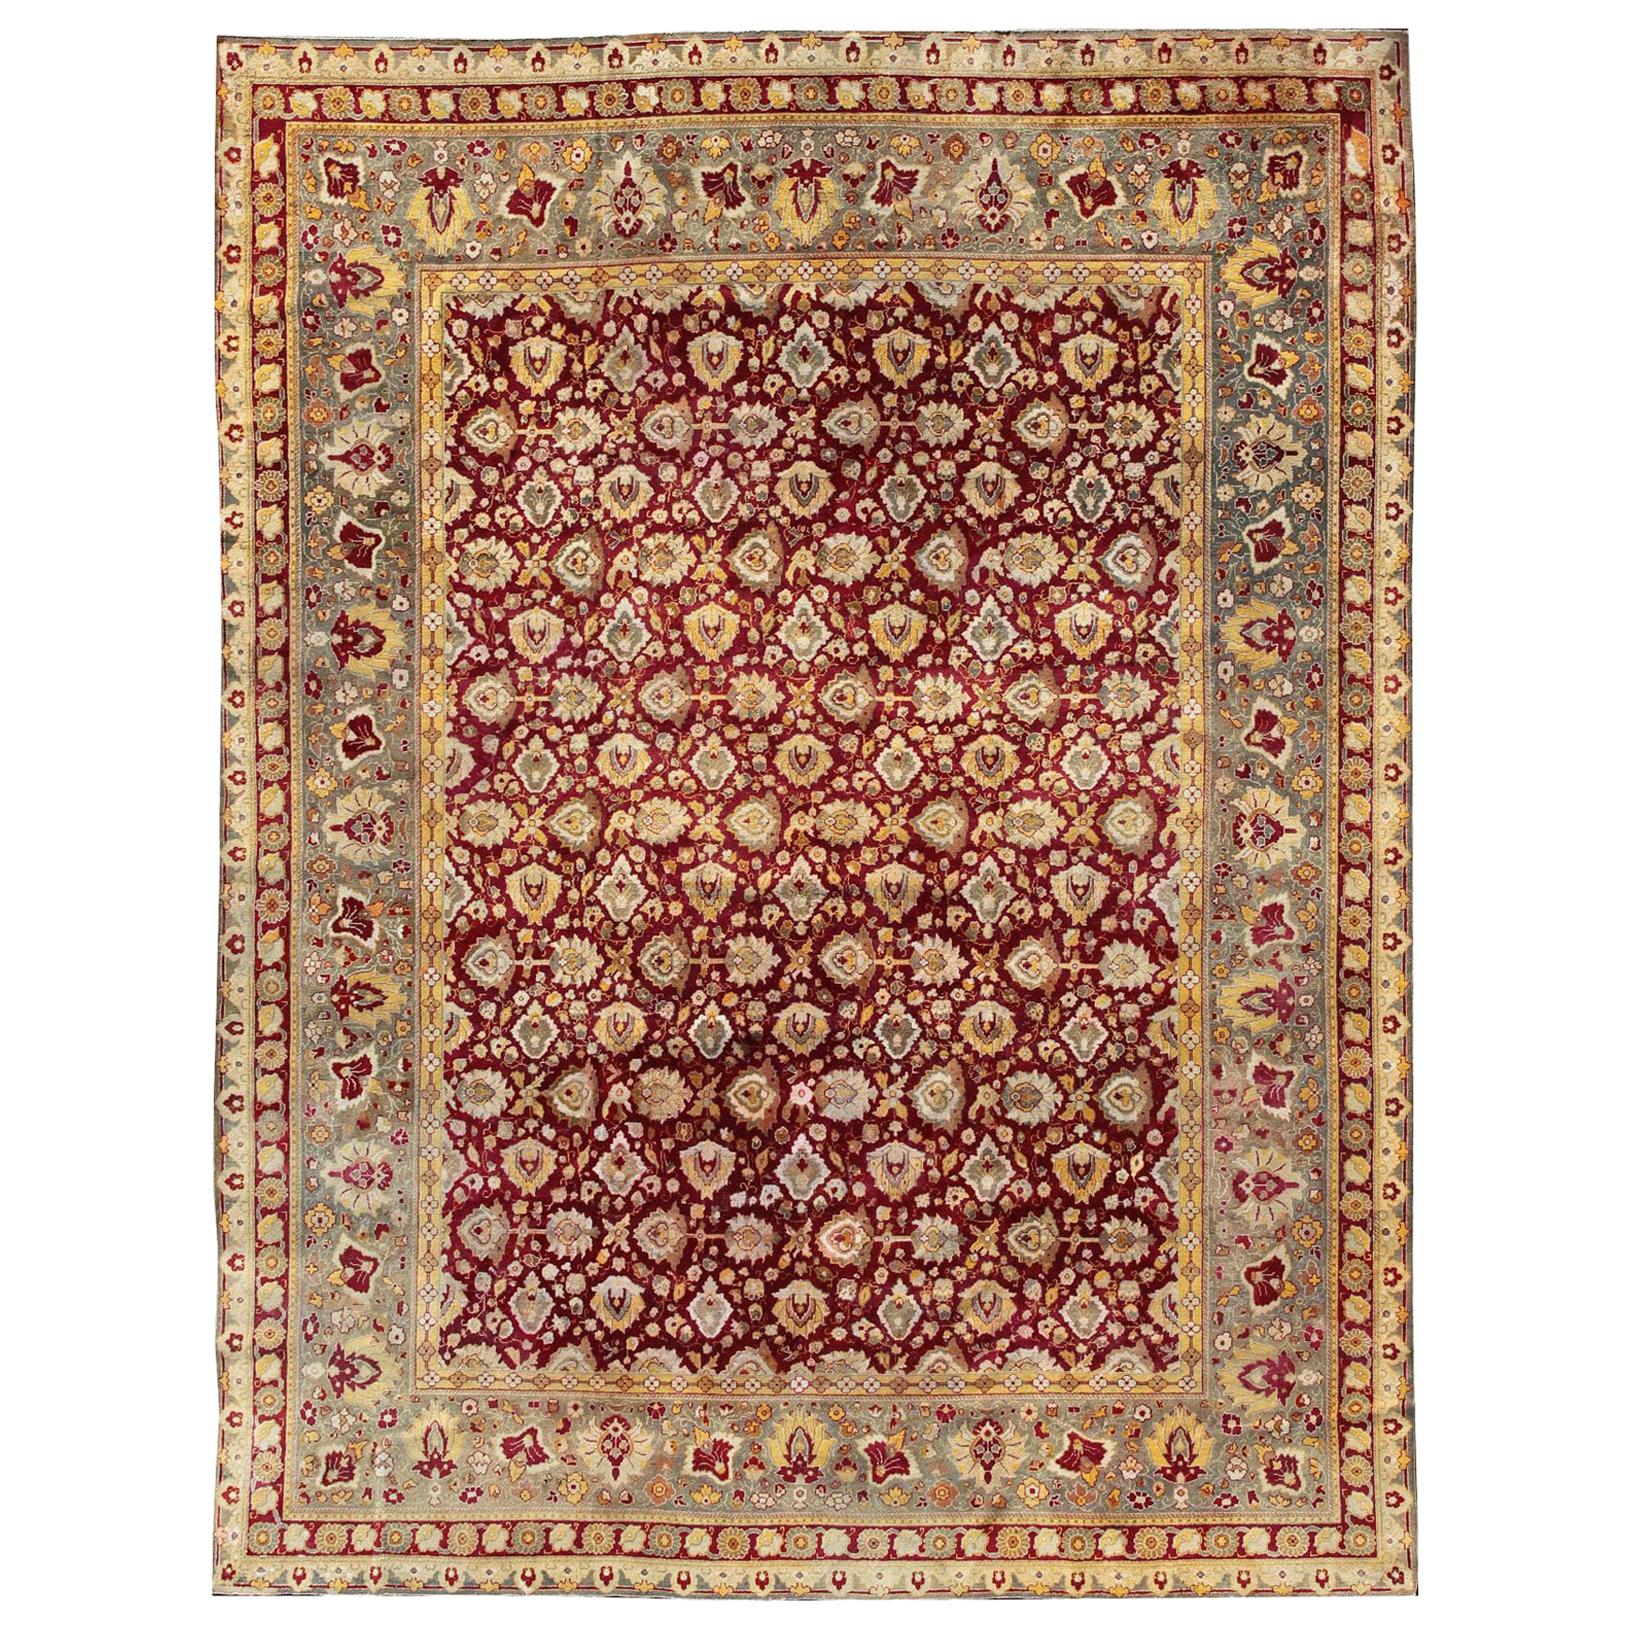 Antique Hand Knotted Indian Agra Rug Maroon Red Background and Gray Green Border For Sale